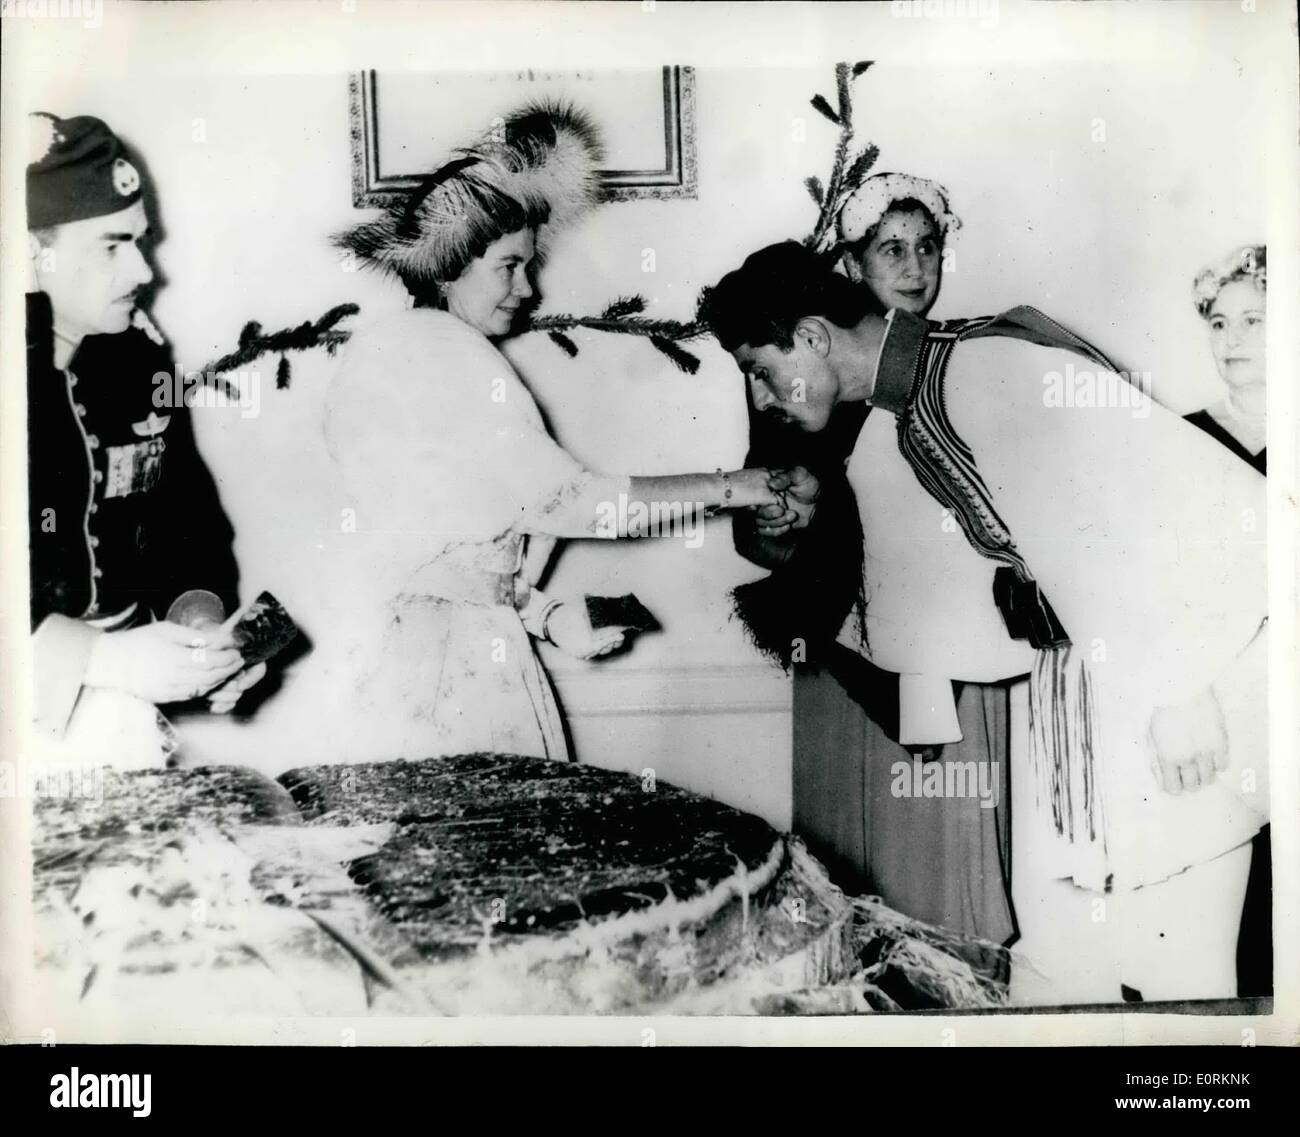 Jan. 01, 1960 - New Year ceremony in Athens.. traditional cutting of the cake - by the Queen.. Queen Frederica of Greece performed the traditional ceremony of Cutting the New year cake - when with the King and other members of her family - she visited the royal guard - in Athens. Photo shows a member of the Royal Guard kissing the hand of the Queen - during the New year ceremonies in Athens. Stock Photo